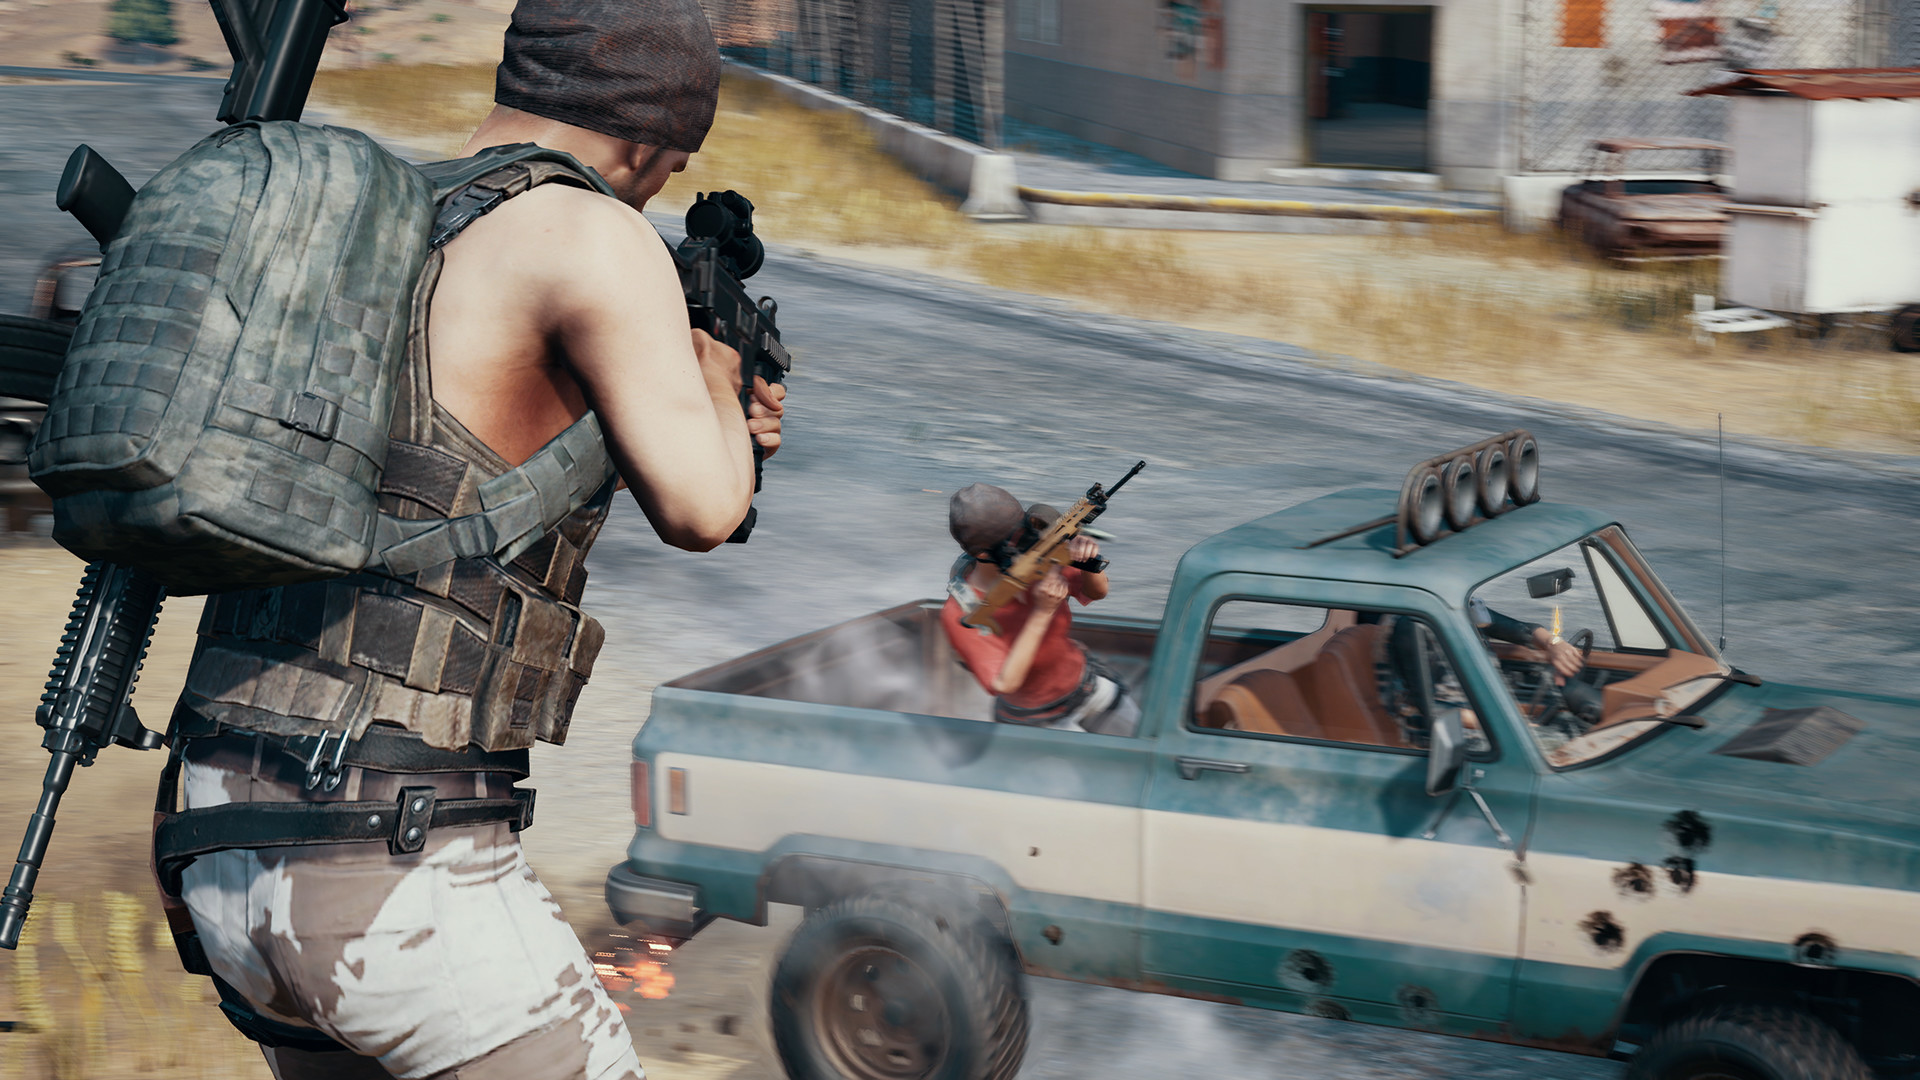 Pubg Could Be Going Free To Play According To Leaker Techradar